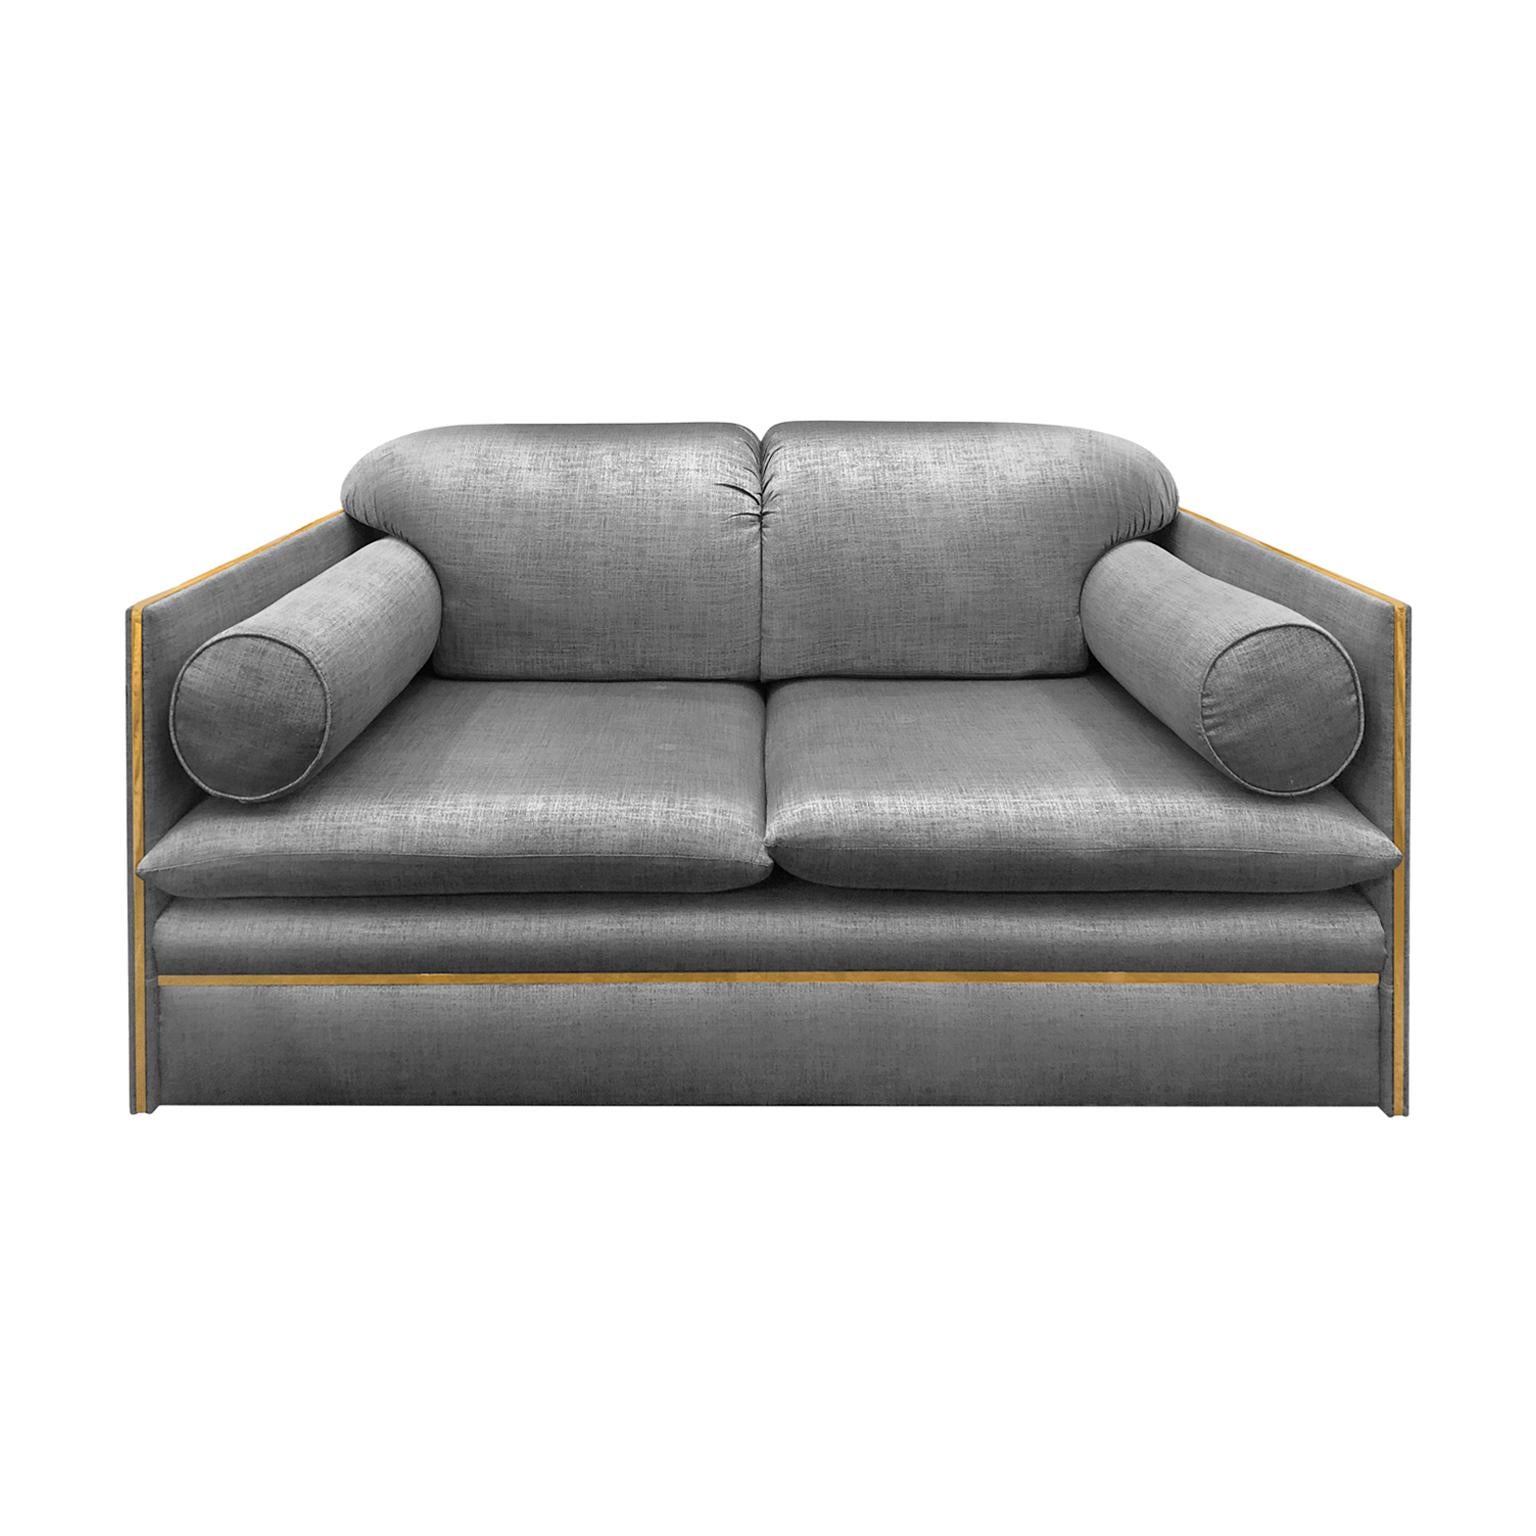 Loveseat with bolster cushions and brass profile newly upholstered in a charcoal sheen fabric. Signed illegibly on arm, Italy, 1970s.